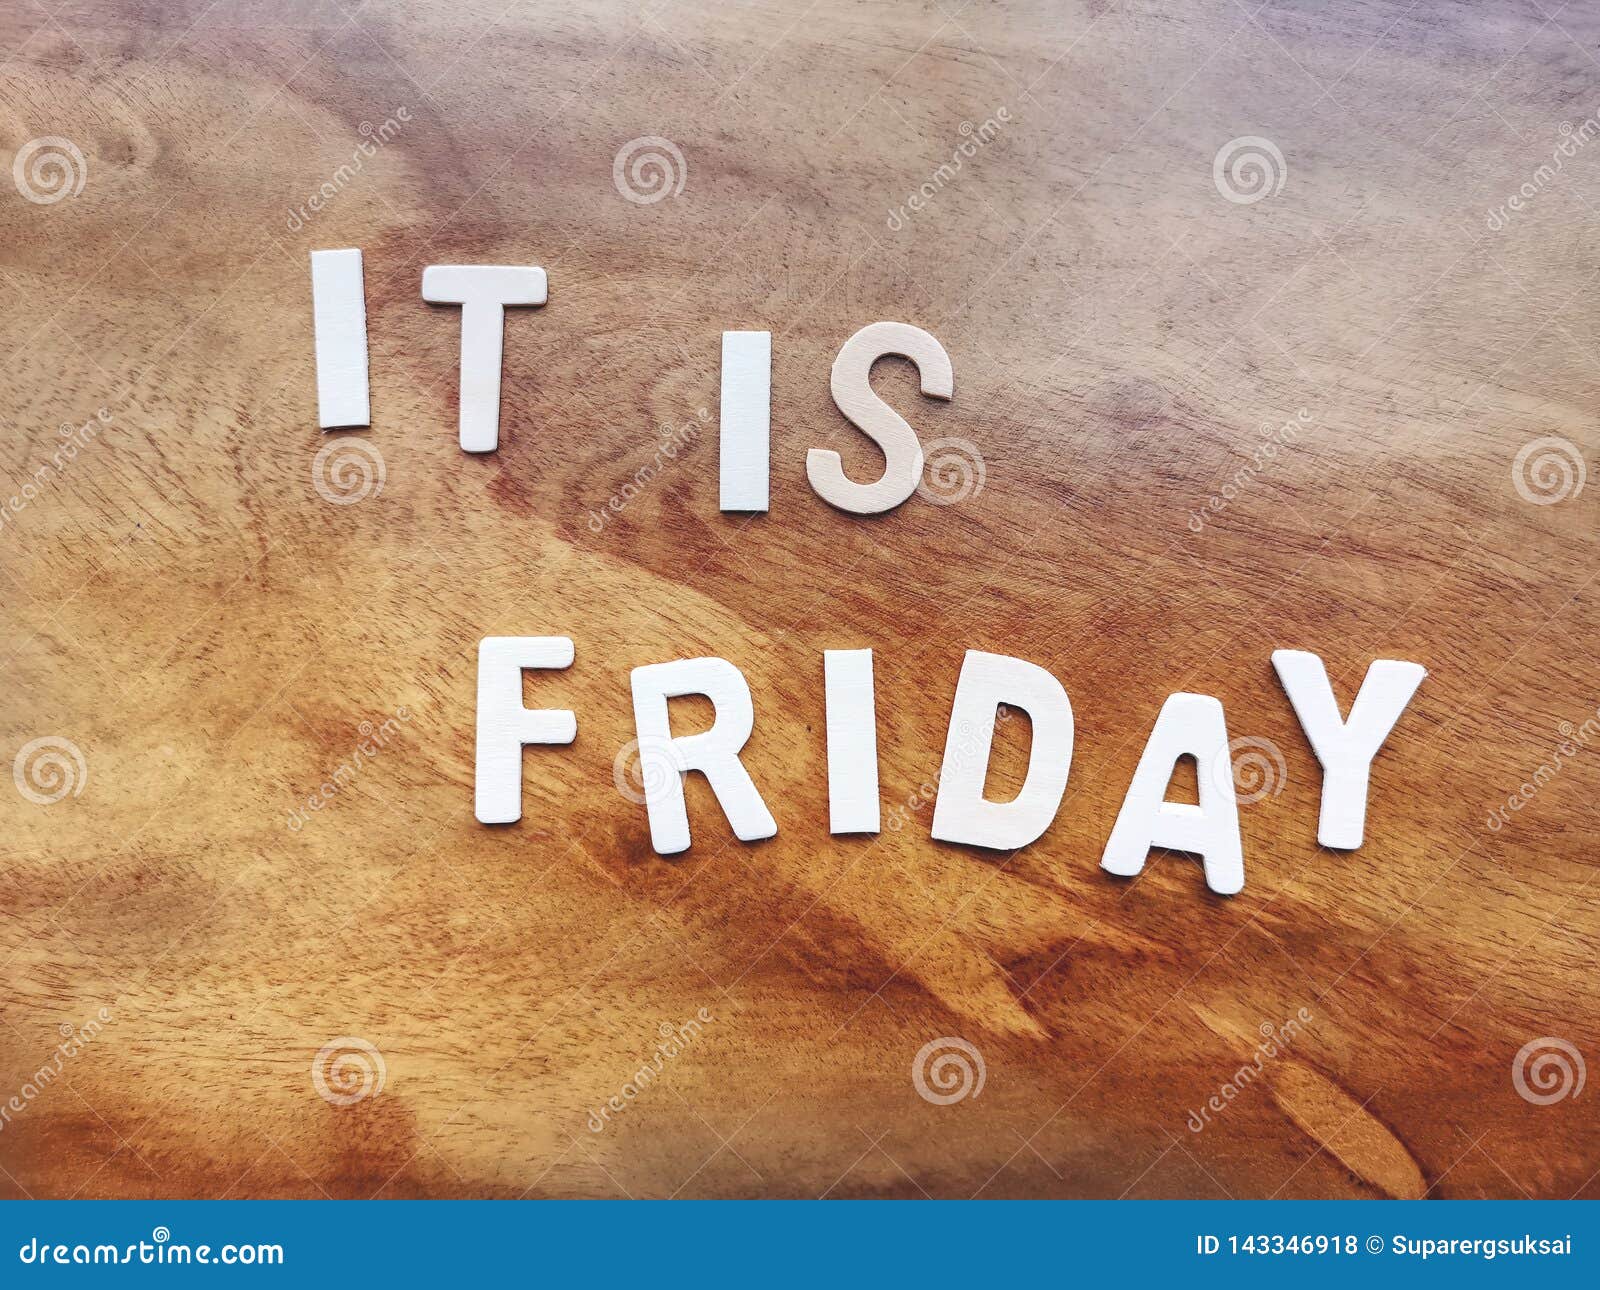 It is Friday Texts on Wooden Background Stock Photo - Image of ...